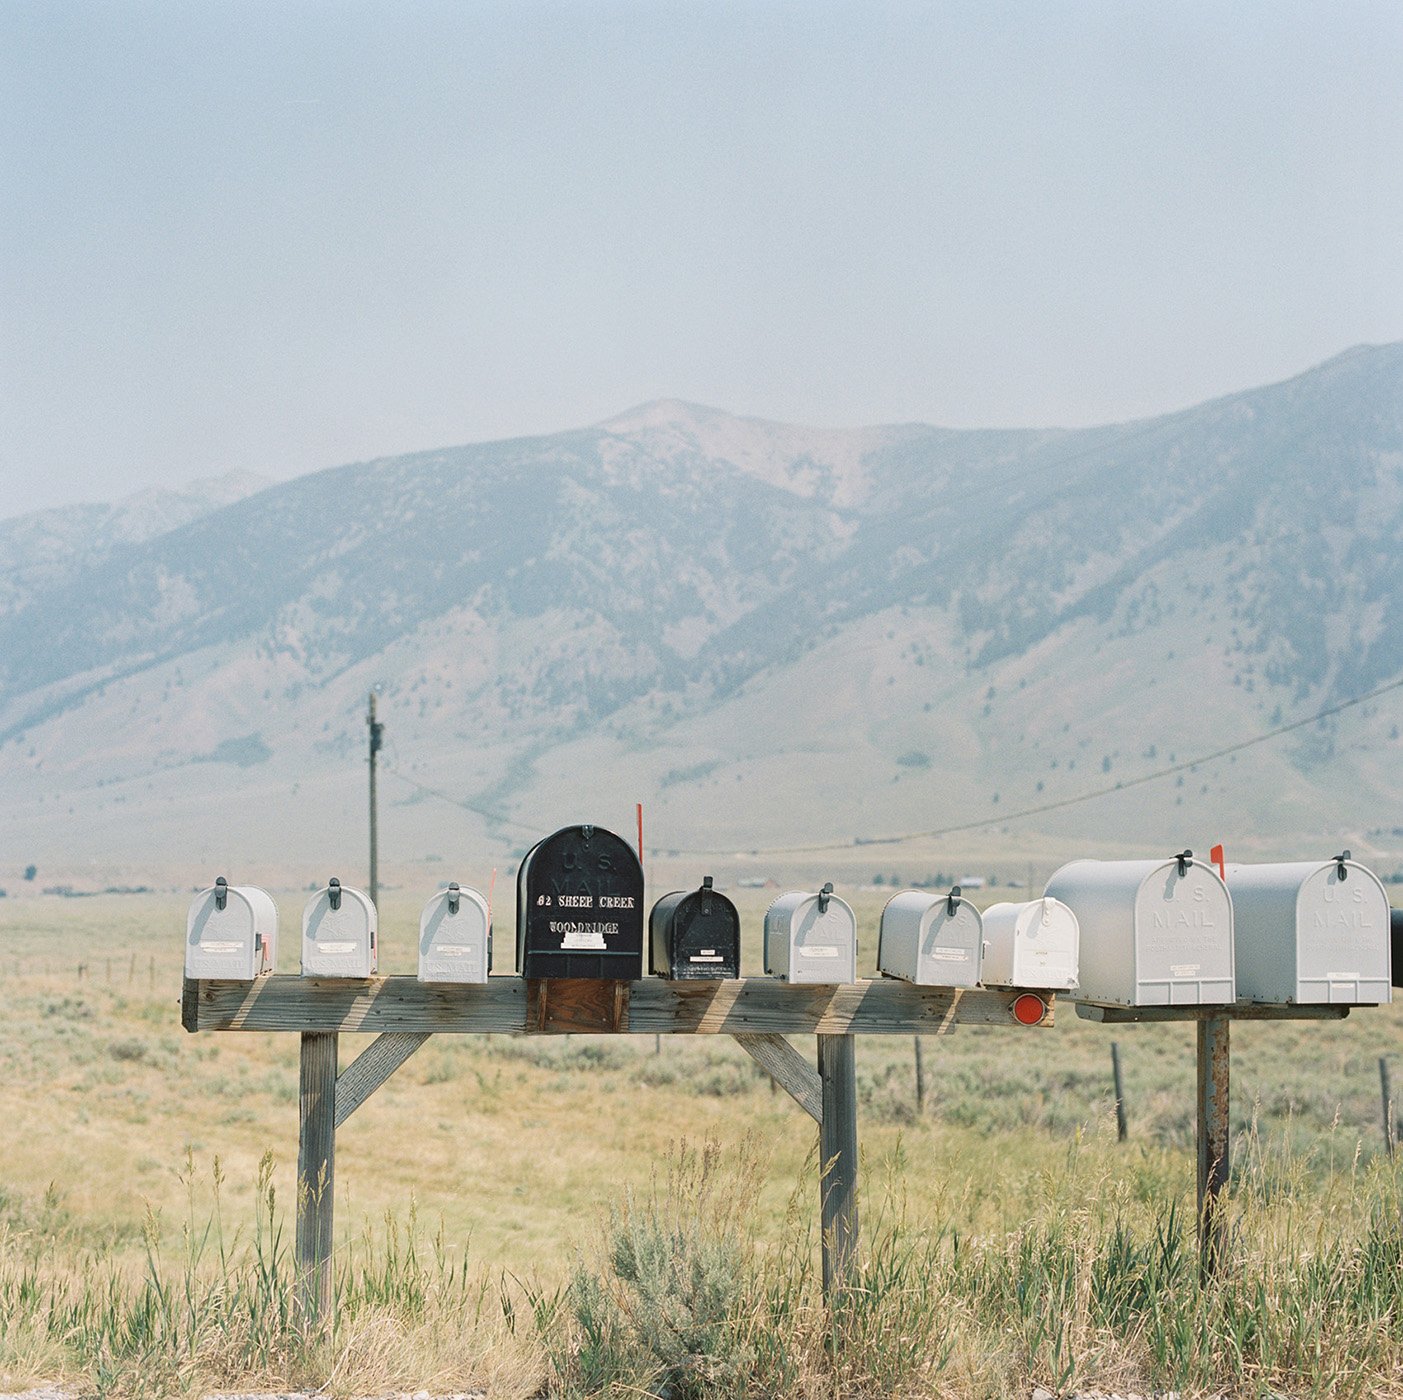 Mailboxes in a row in front of a mountain view landscape shot by Abigail Bobo for First Opportunity bank